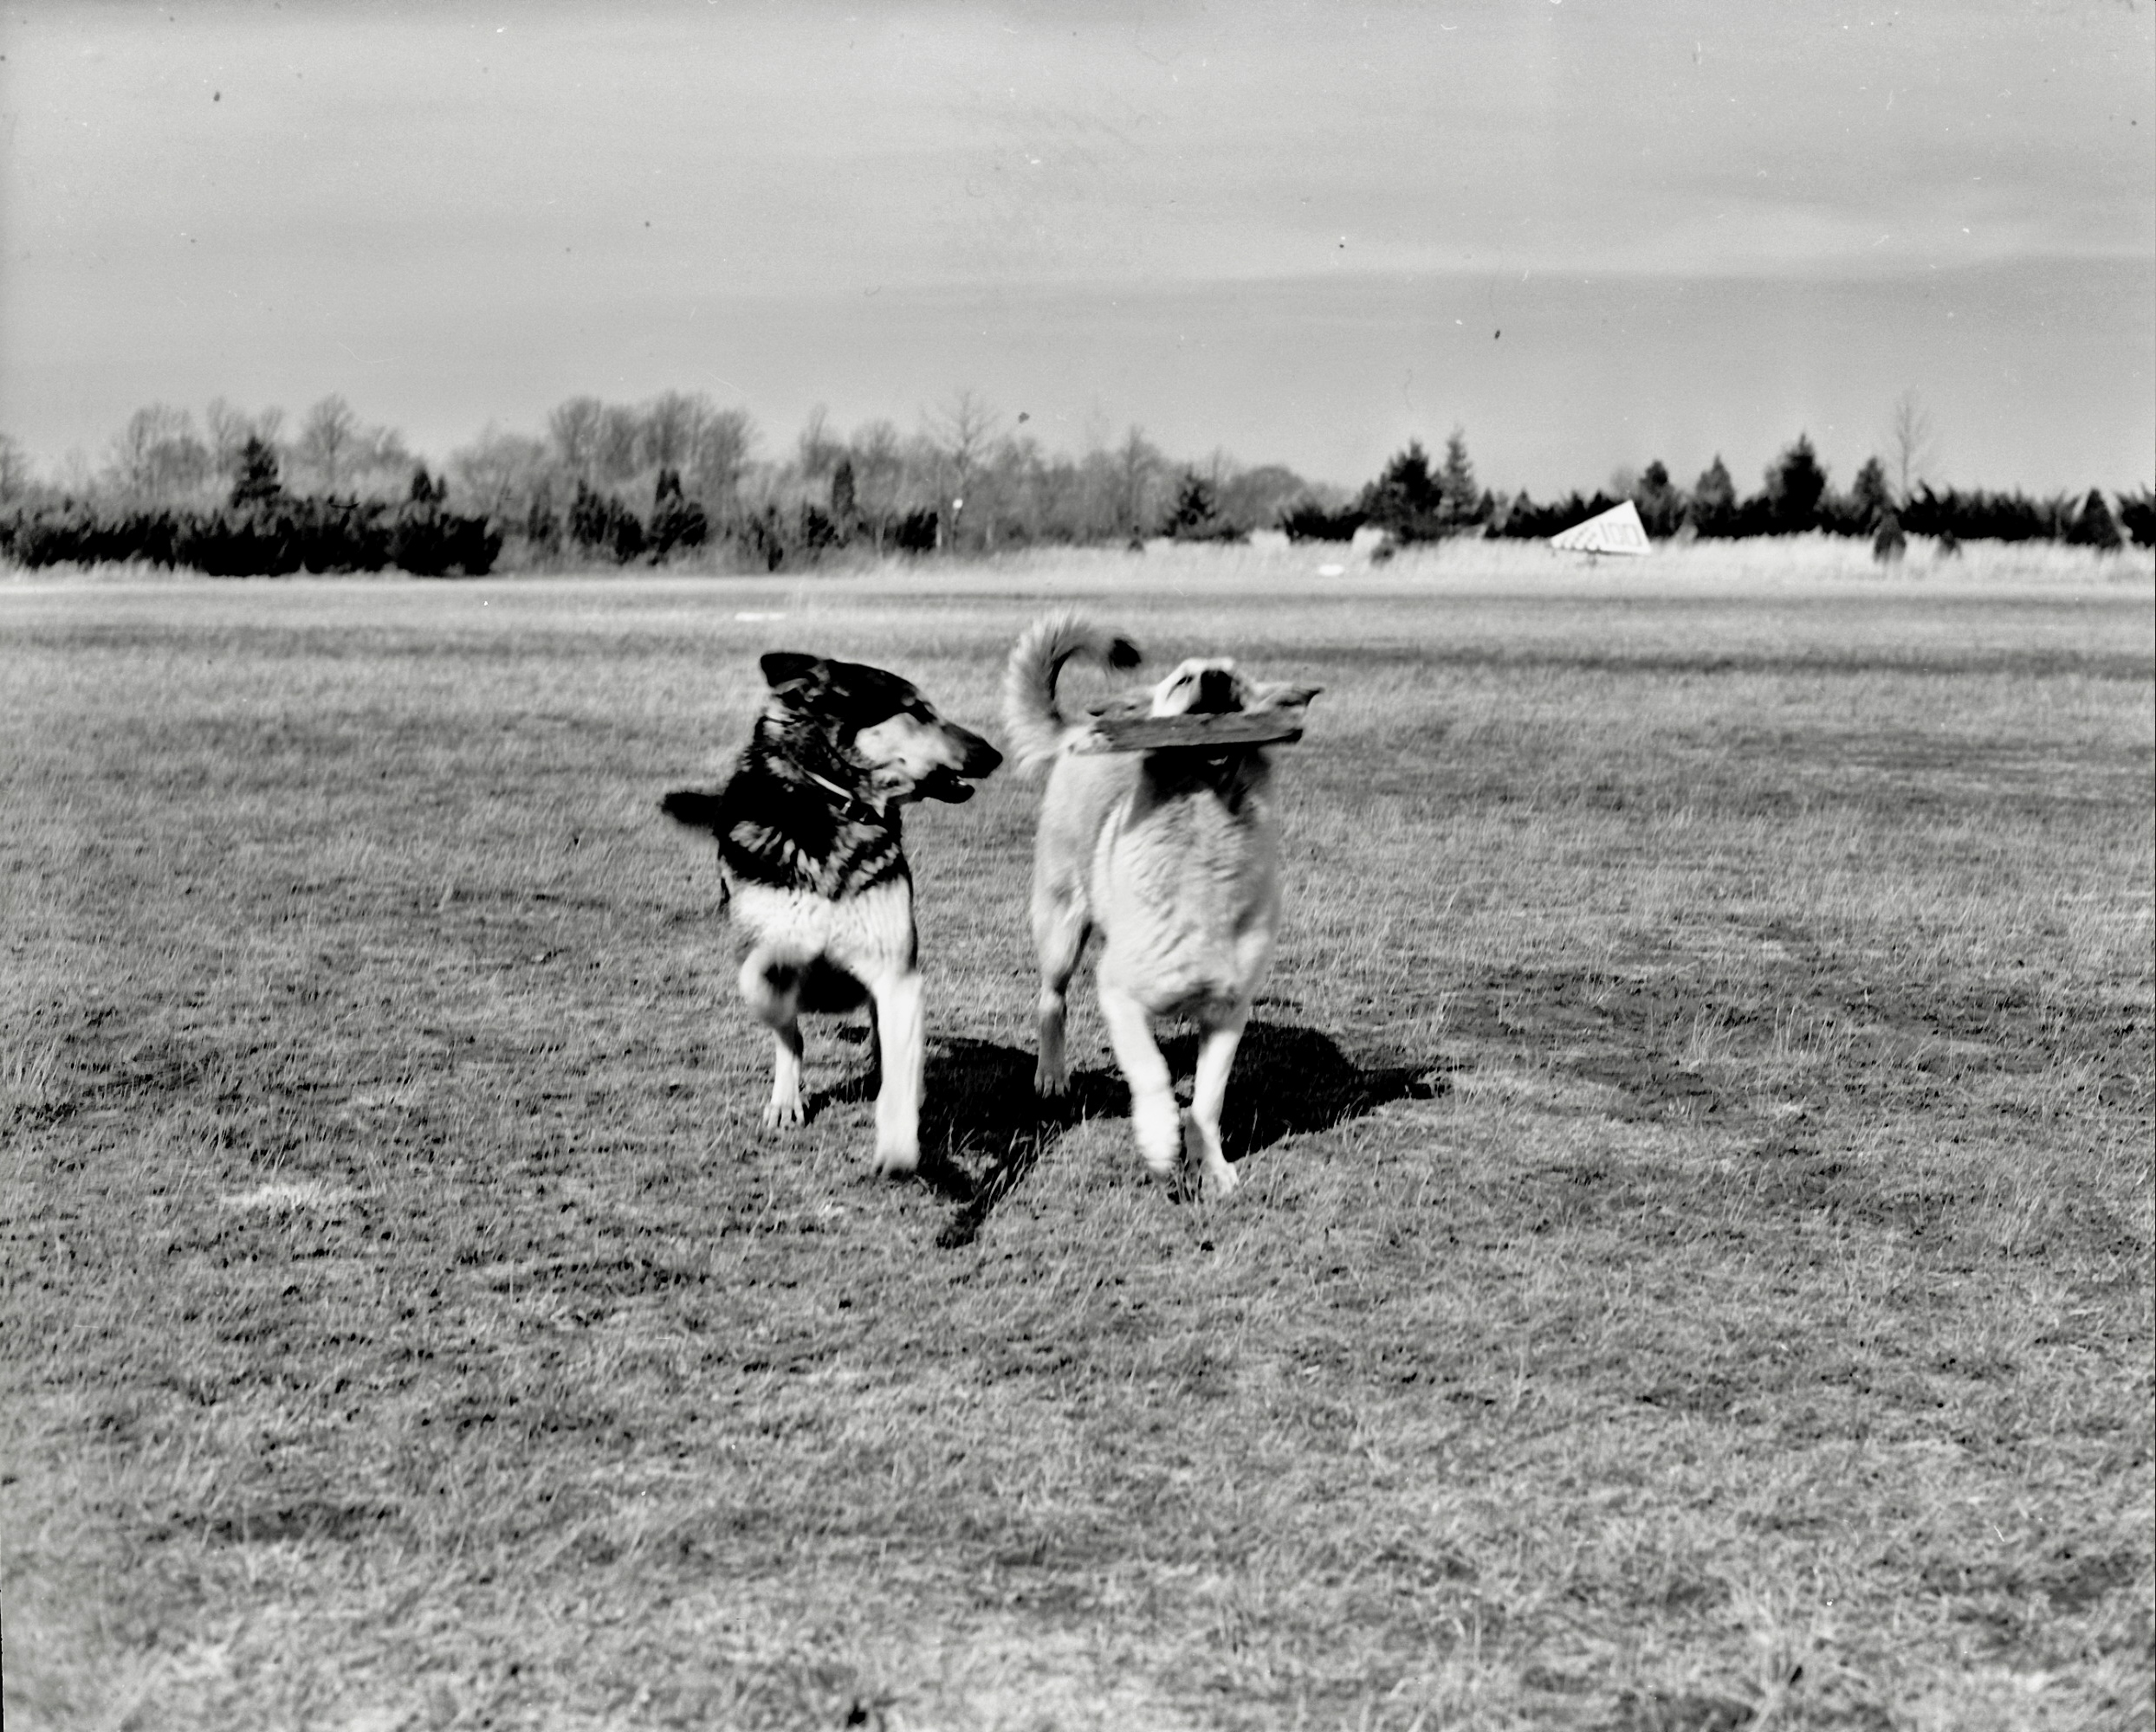 Black and white image of two dogs in an airport field. One is carrying a large stick.